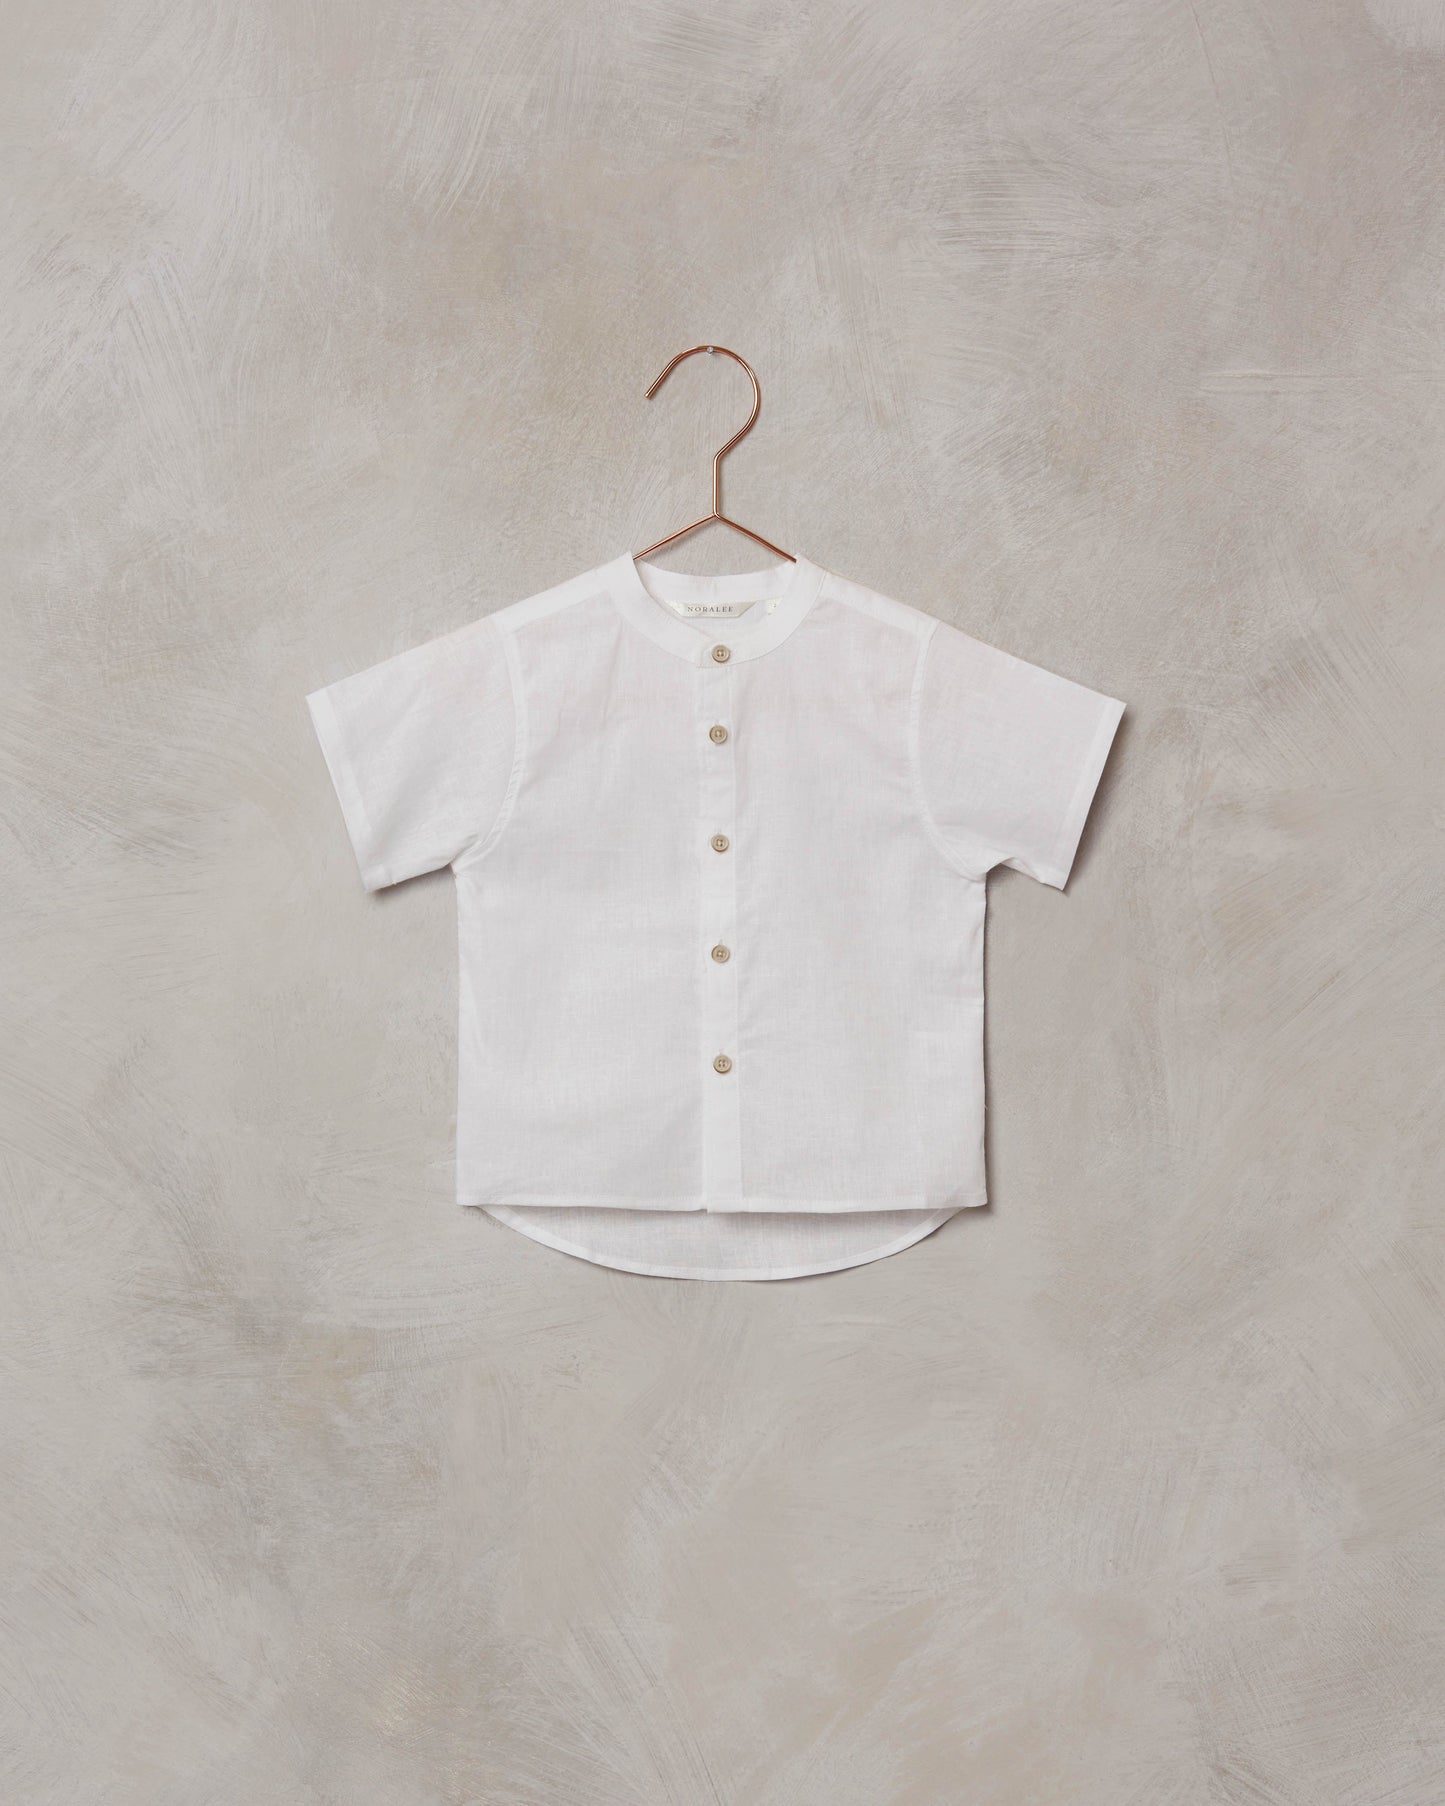 Noralee - Archie Shirt - White - LAST ONE - 8Y